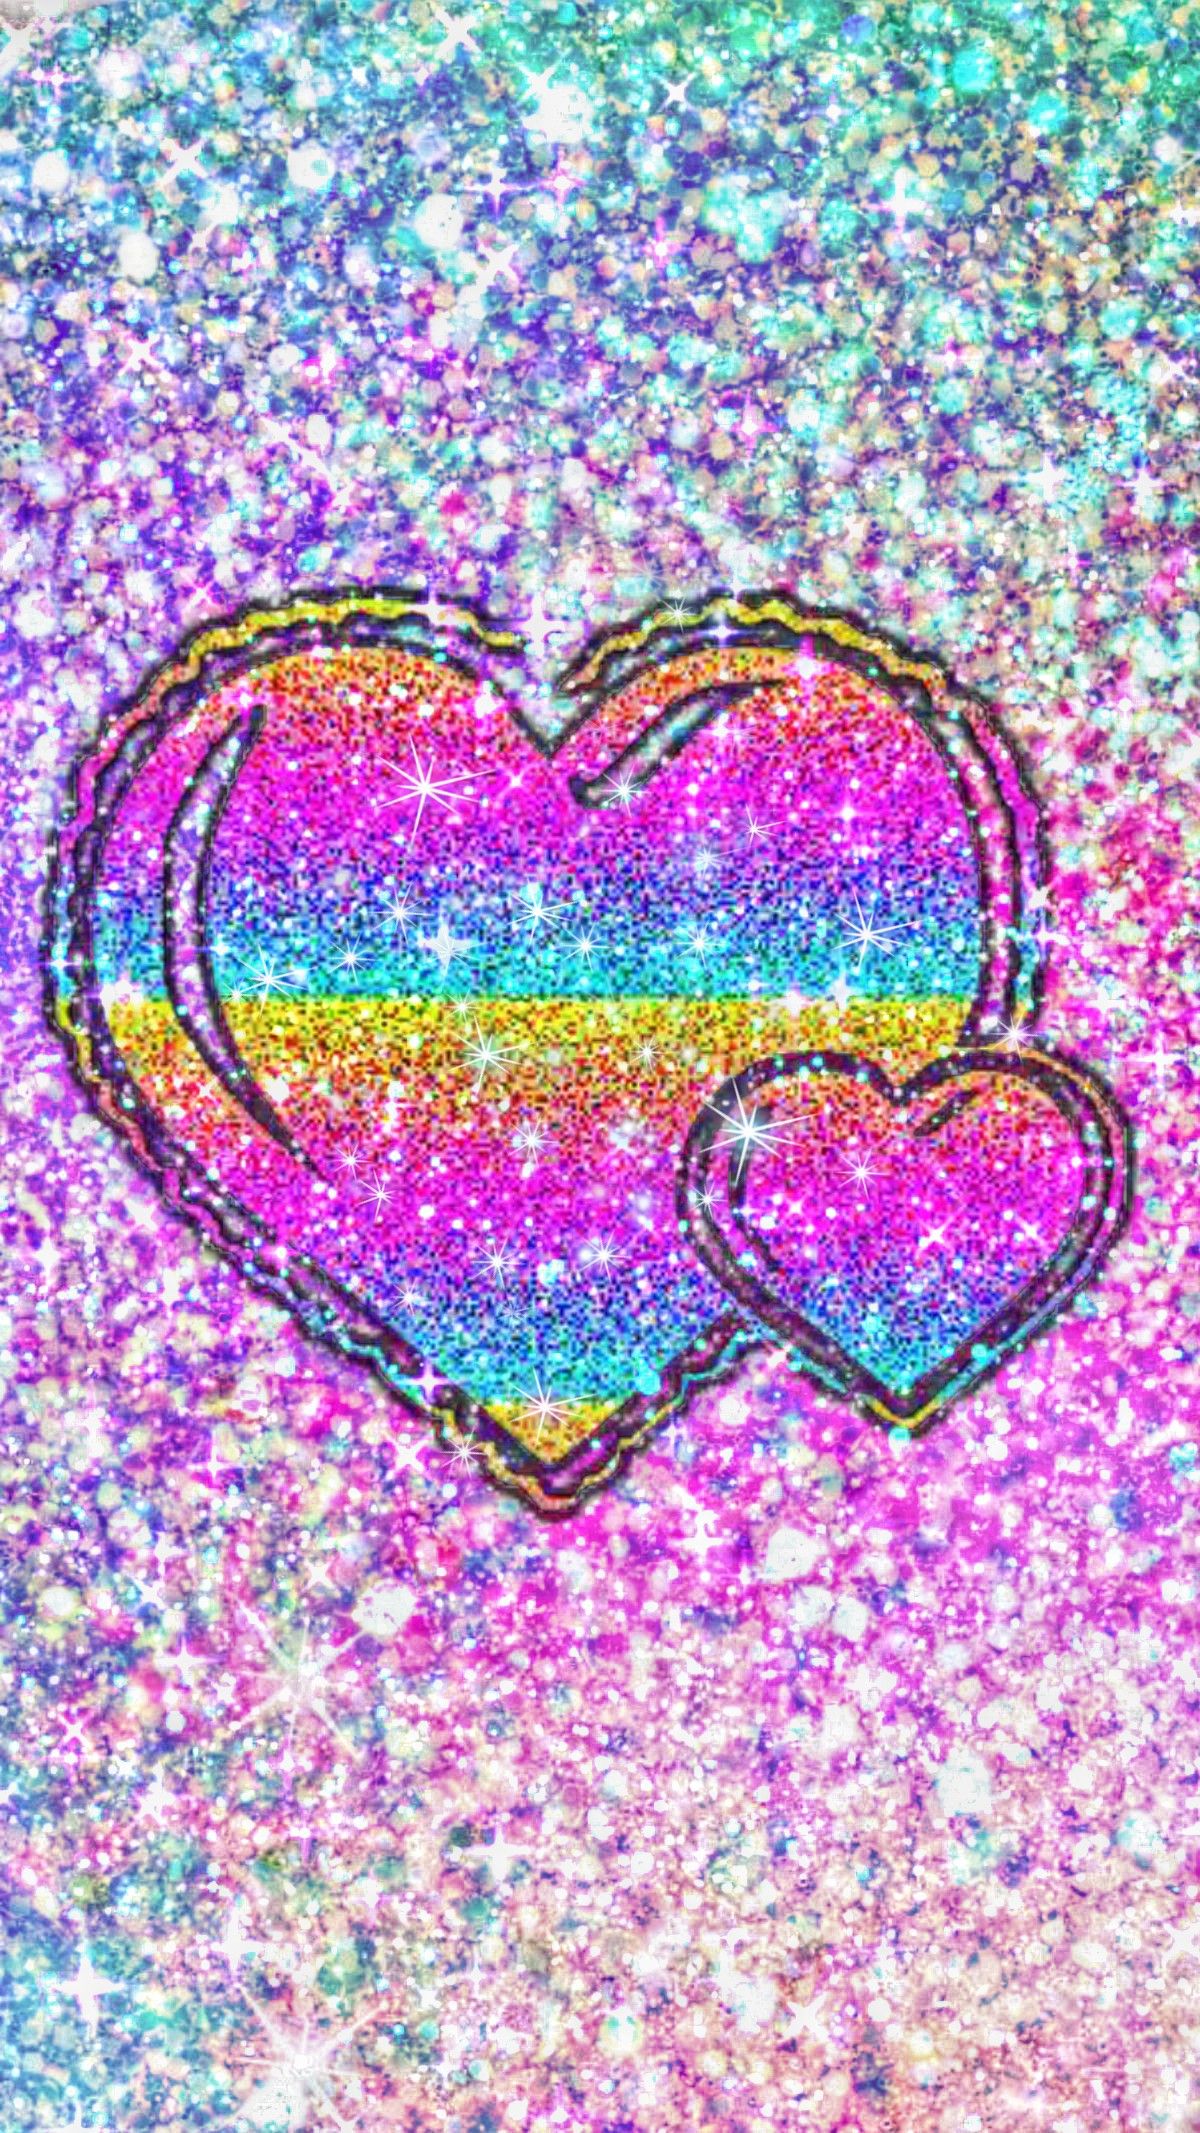 Rainbow Glittery Hearts, made by me #patterns #colorful #glitter #galaxy # wallpaper #background. Heart iphone wallpaper, Heart wallpaper, Glitter phone wallpaper